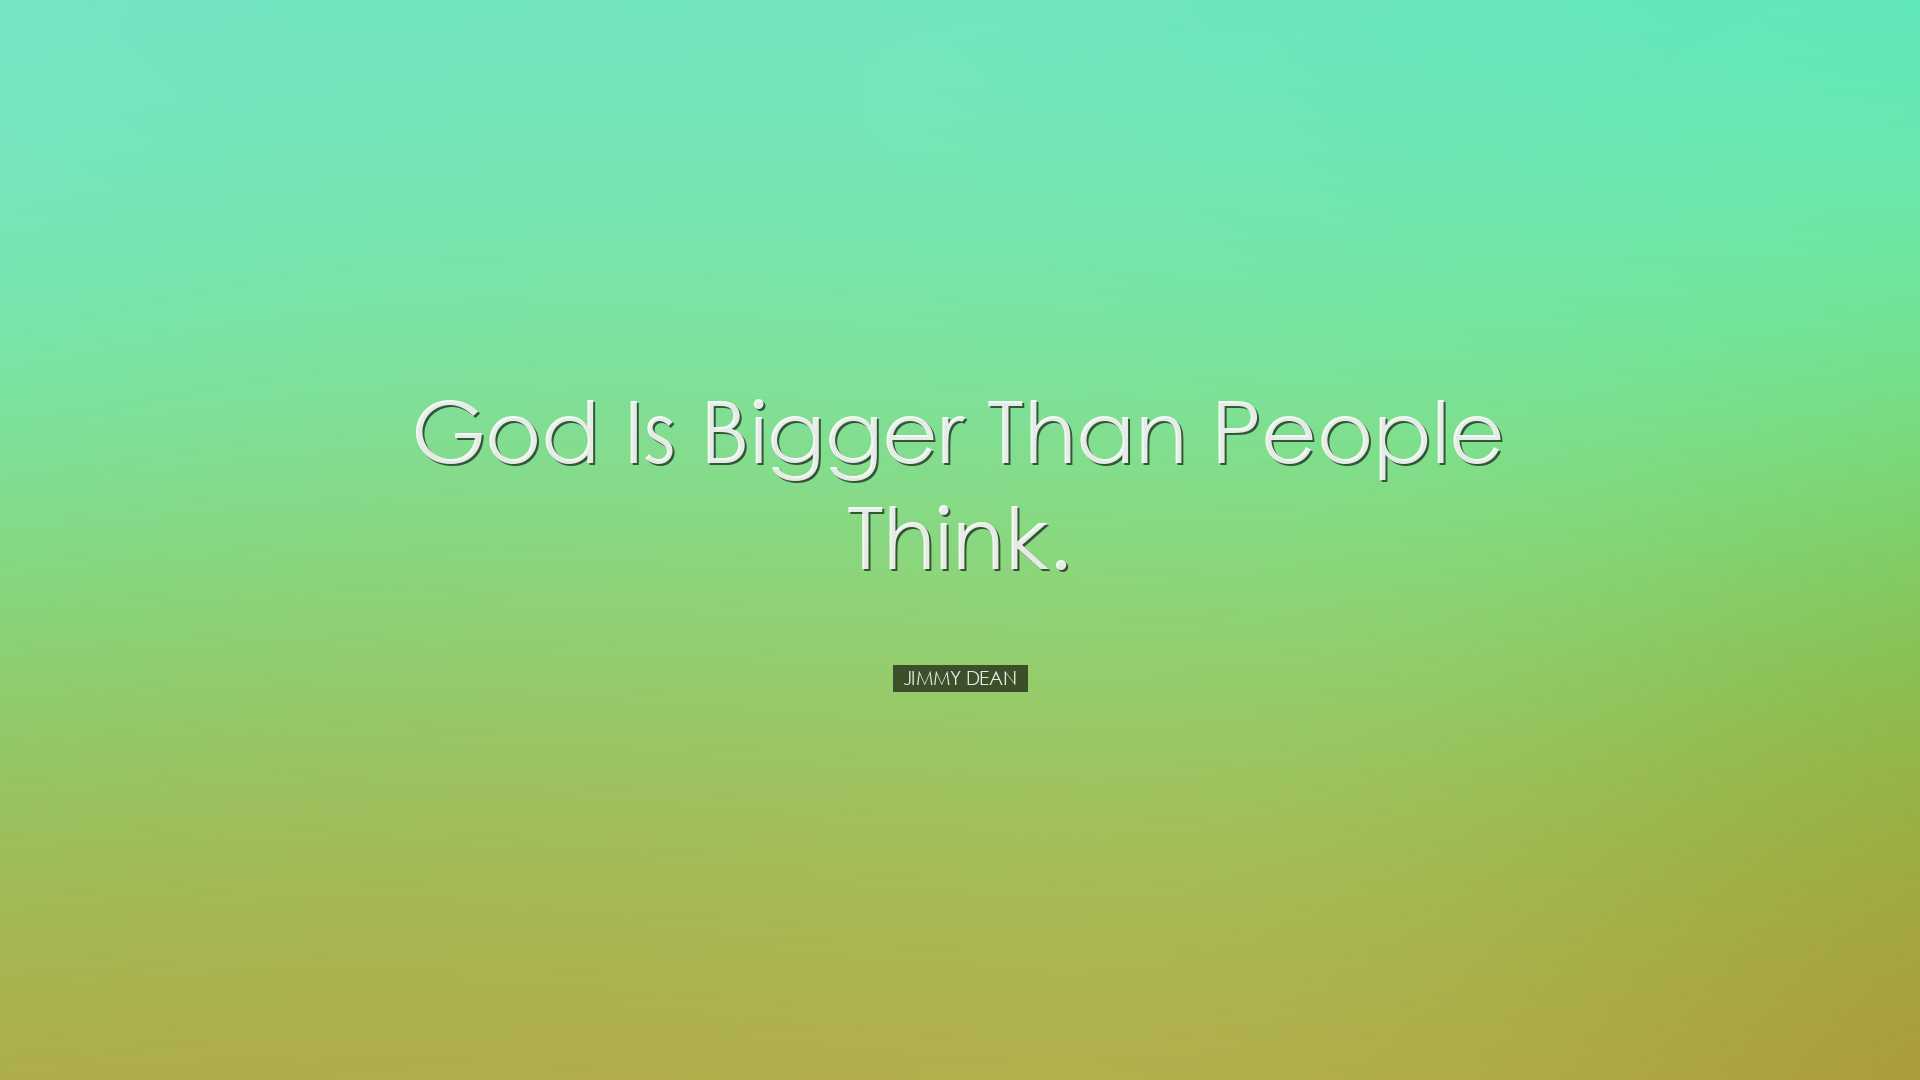 God is bigger than people think. - Jimmy Dean